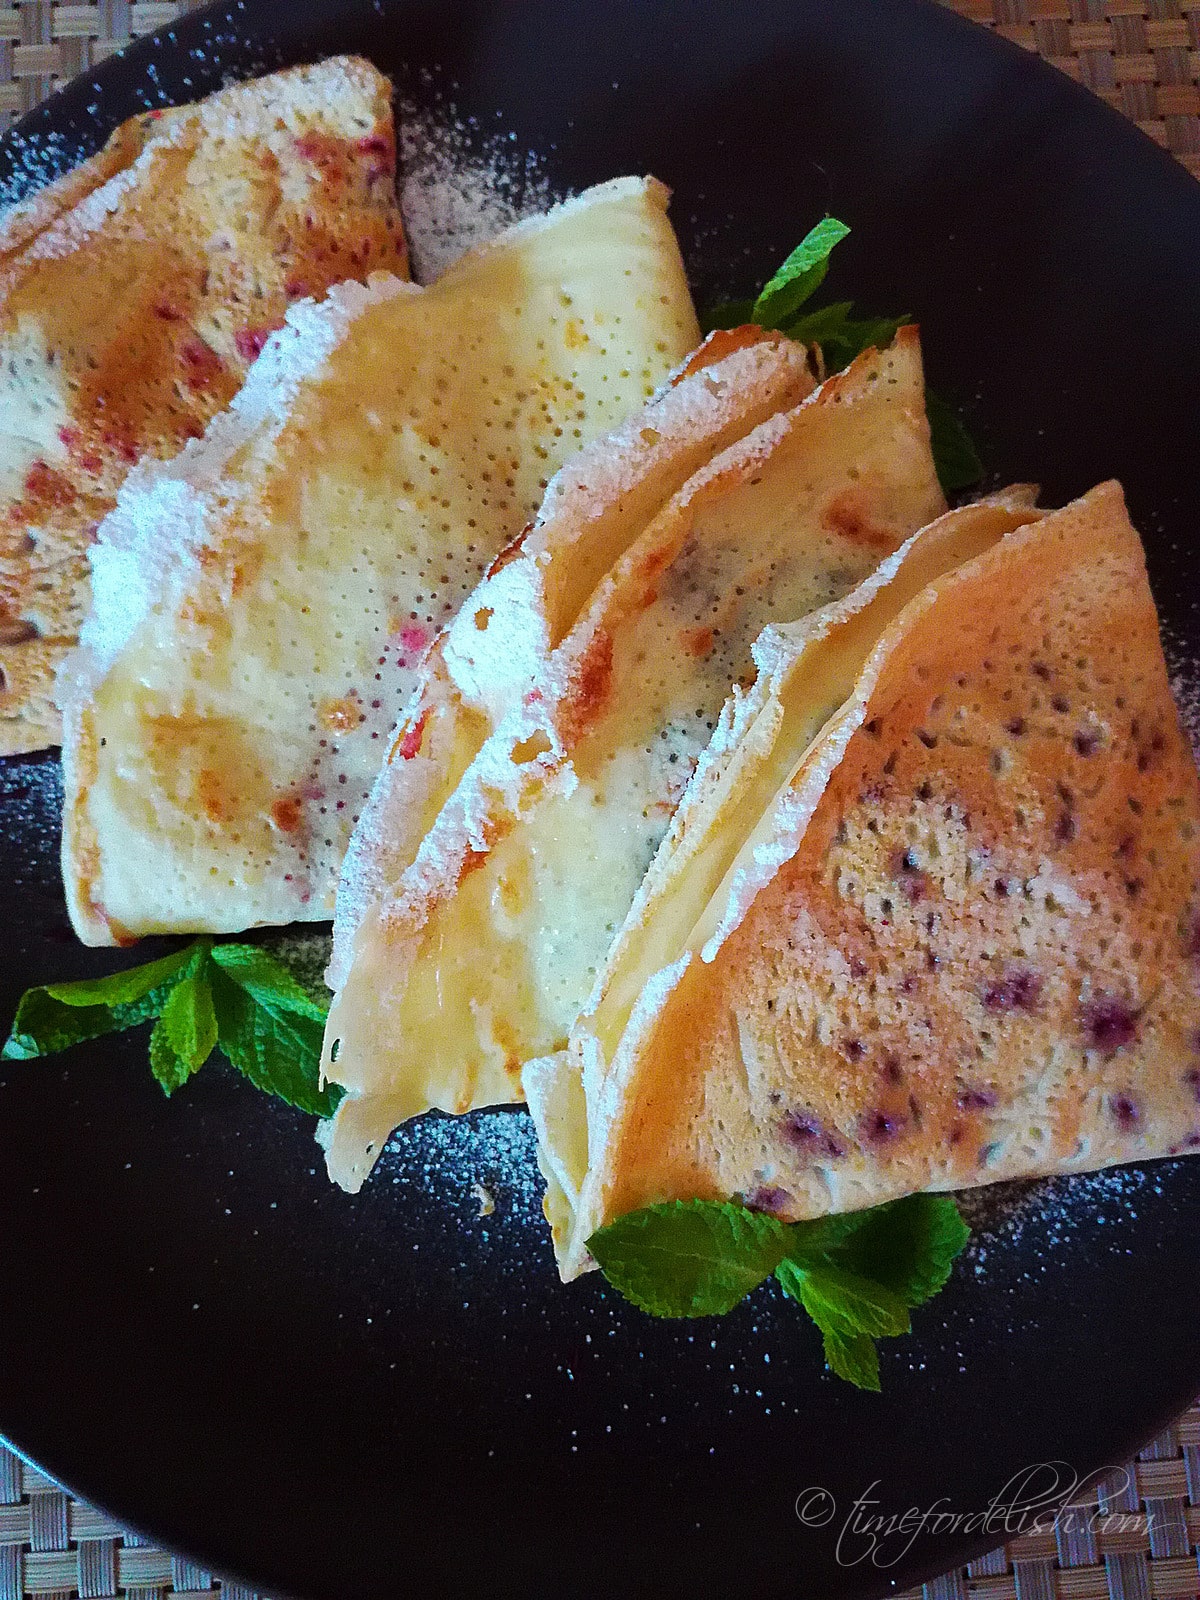 french pancakes (crepes)